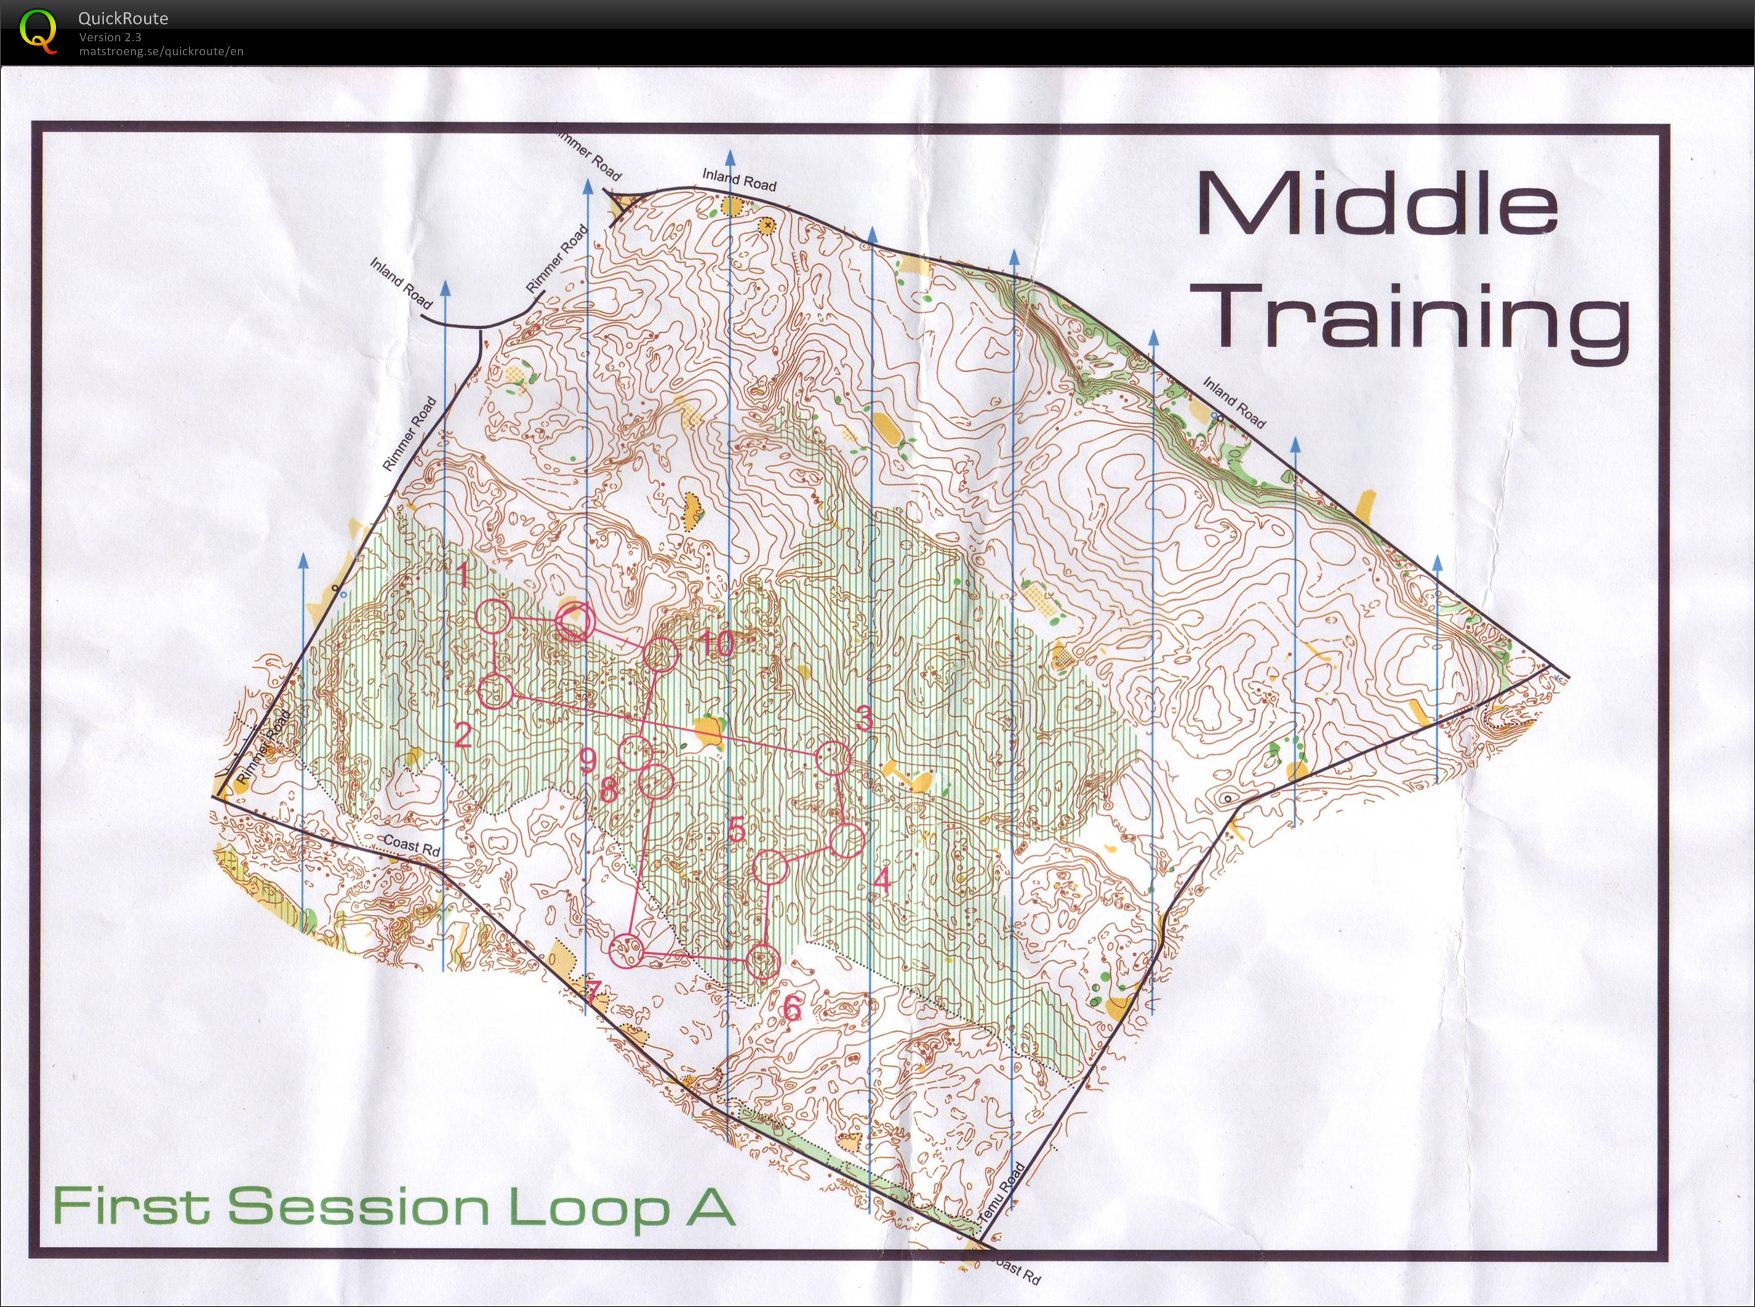 Middle Training - Rimmer Rd (2012-03-30)